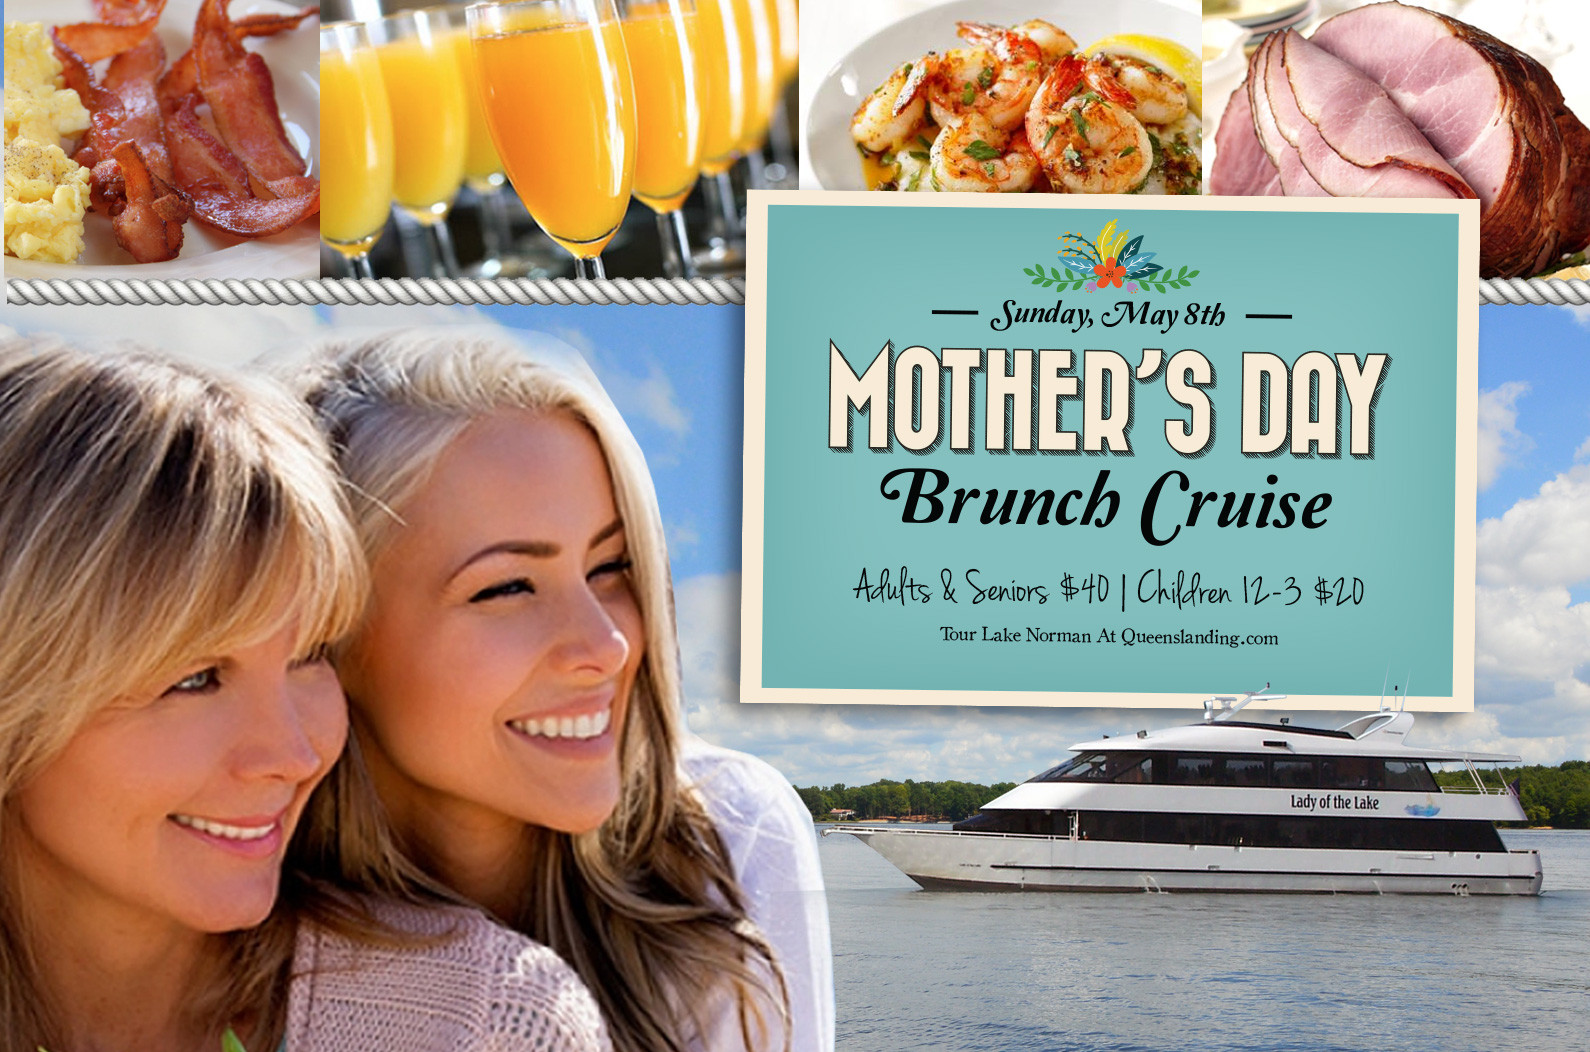 Mothers Day Dinner Cruise
 Up ing Events – Mothers Day Brunch & Dinner Cruises